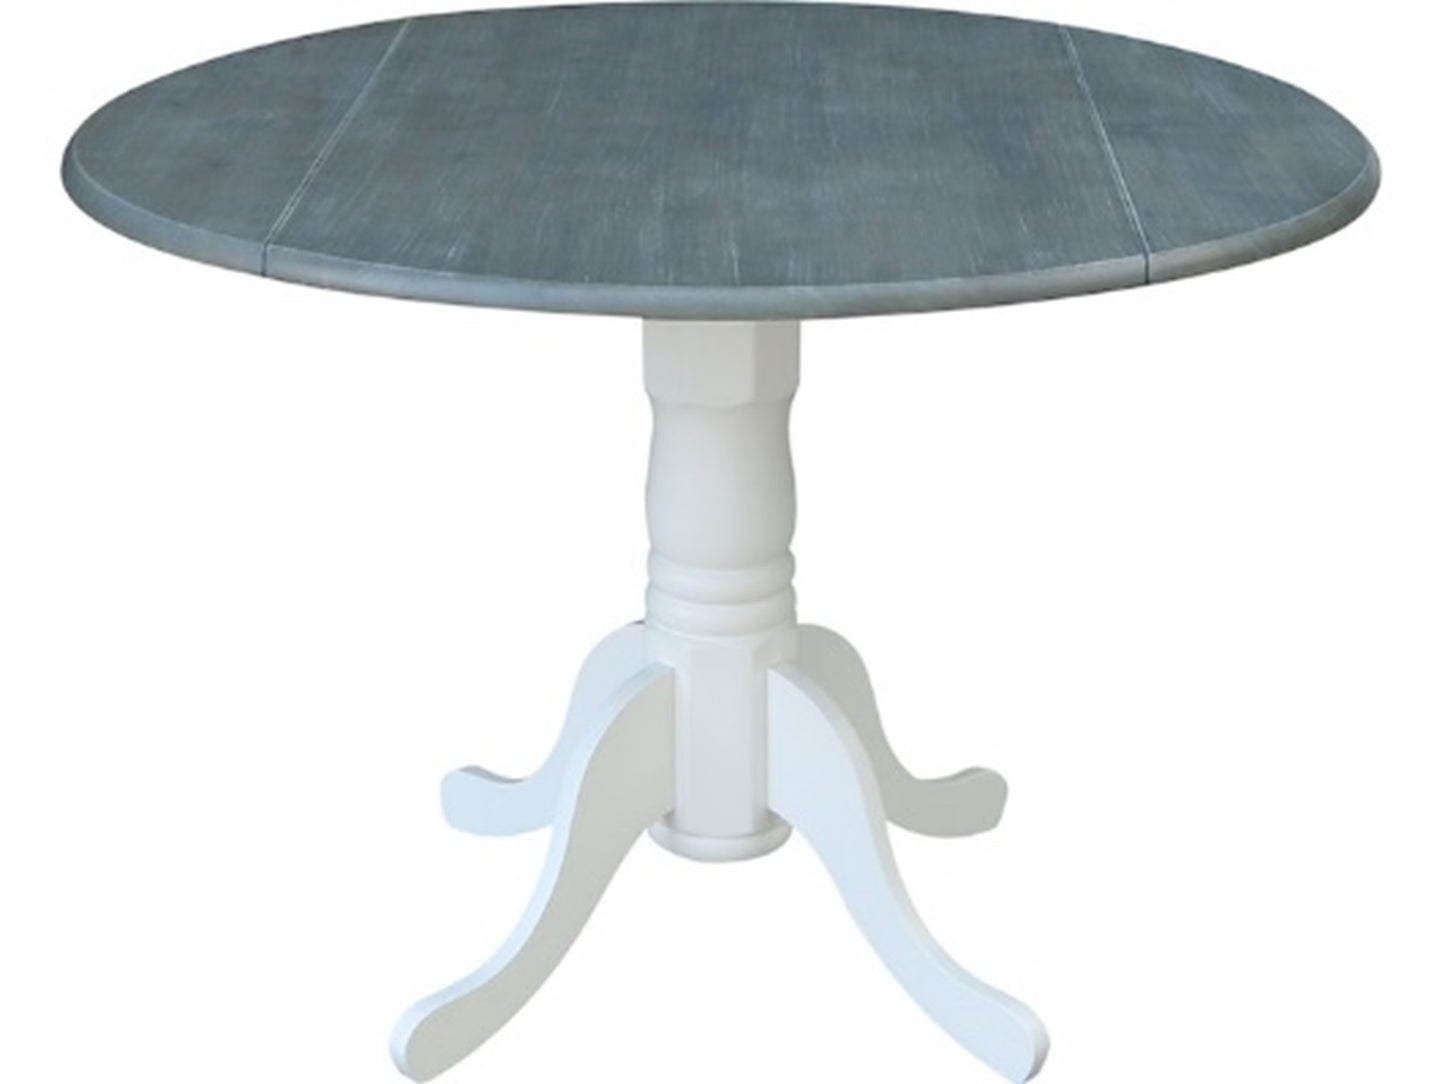 John Thomas “Dining Essentials 42” Drop Leaf Table In Gray and White”